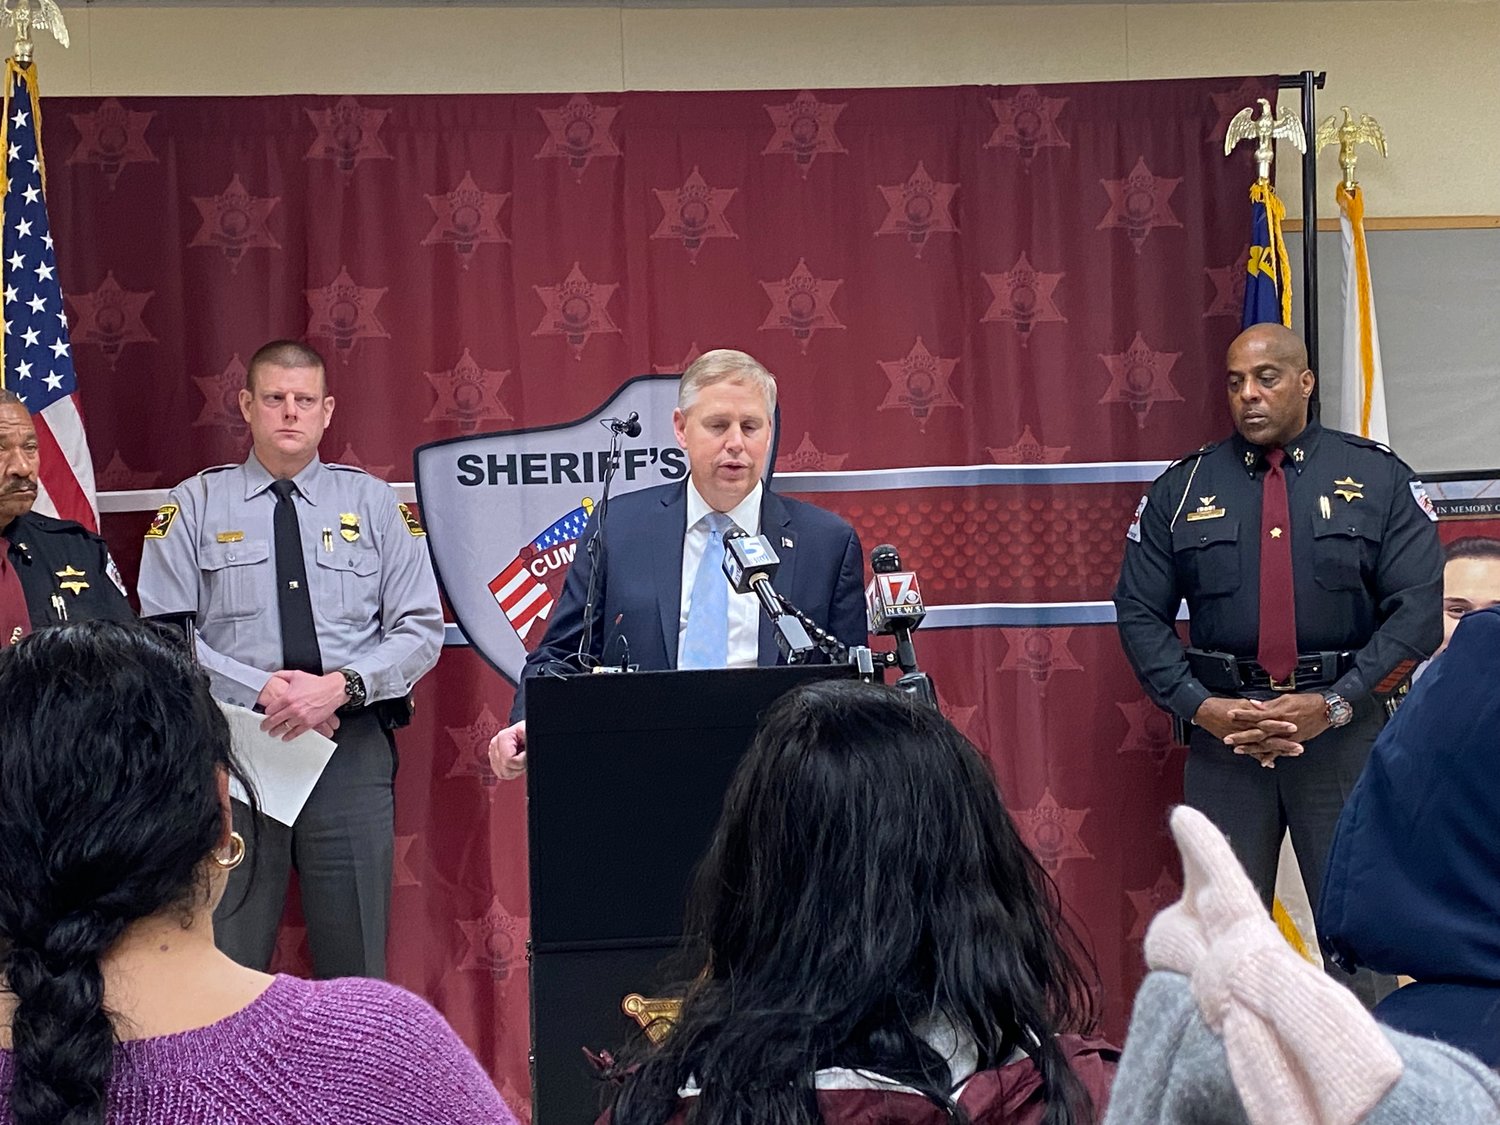 Cumberland County District Attorney Billy West talks during a news conference Friday about the death of Deputy Oscar Yovani Bolanos-Anavisca Jr., who died early Friday after being struck by a vehicle on Gillespie Street while investigating a robbery report.